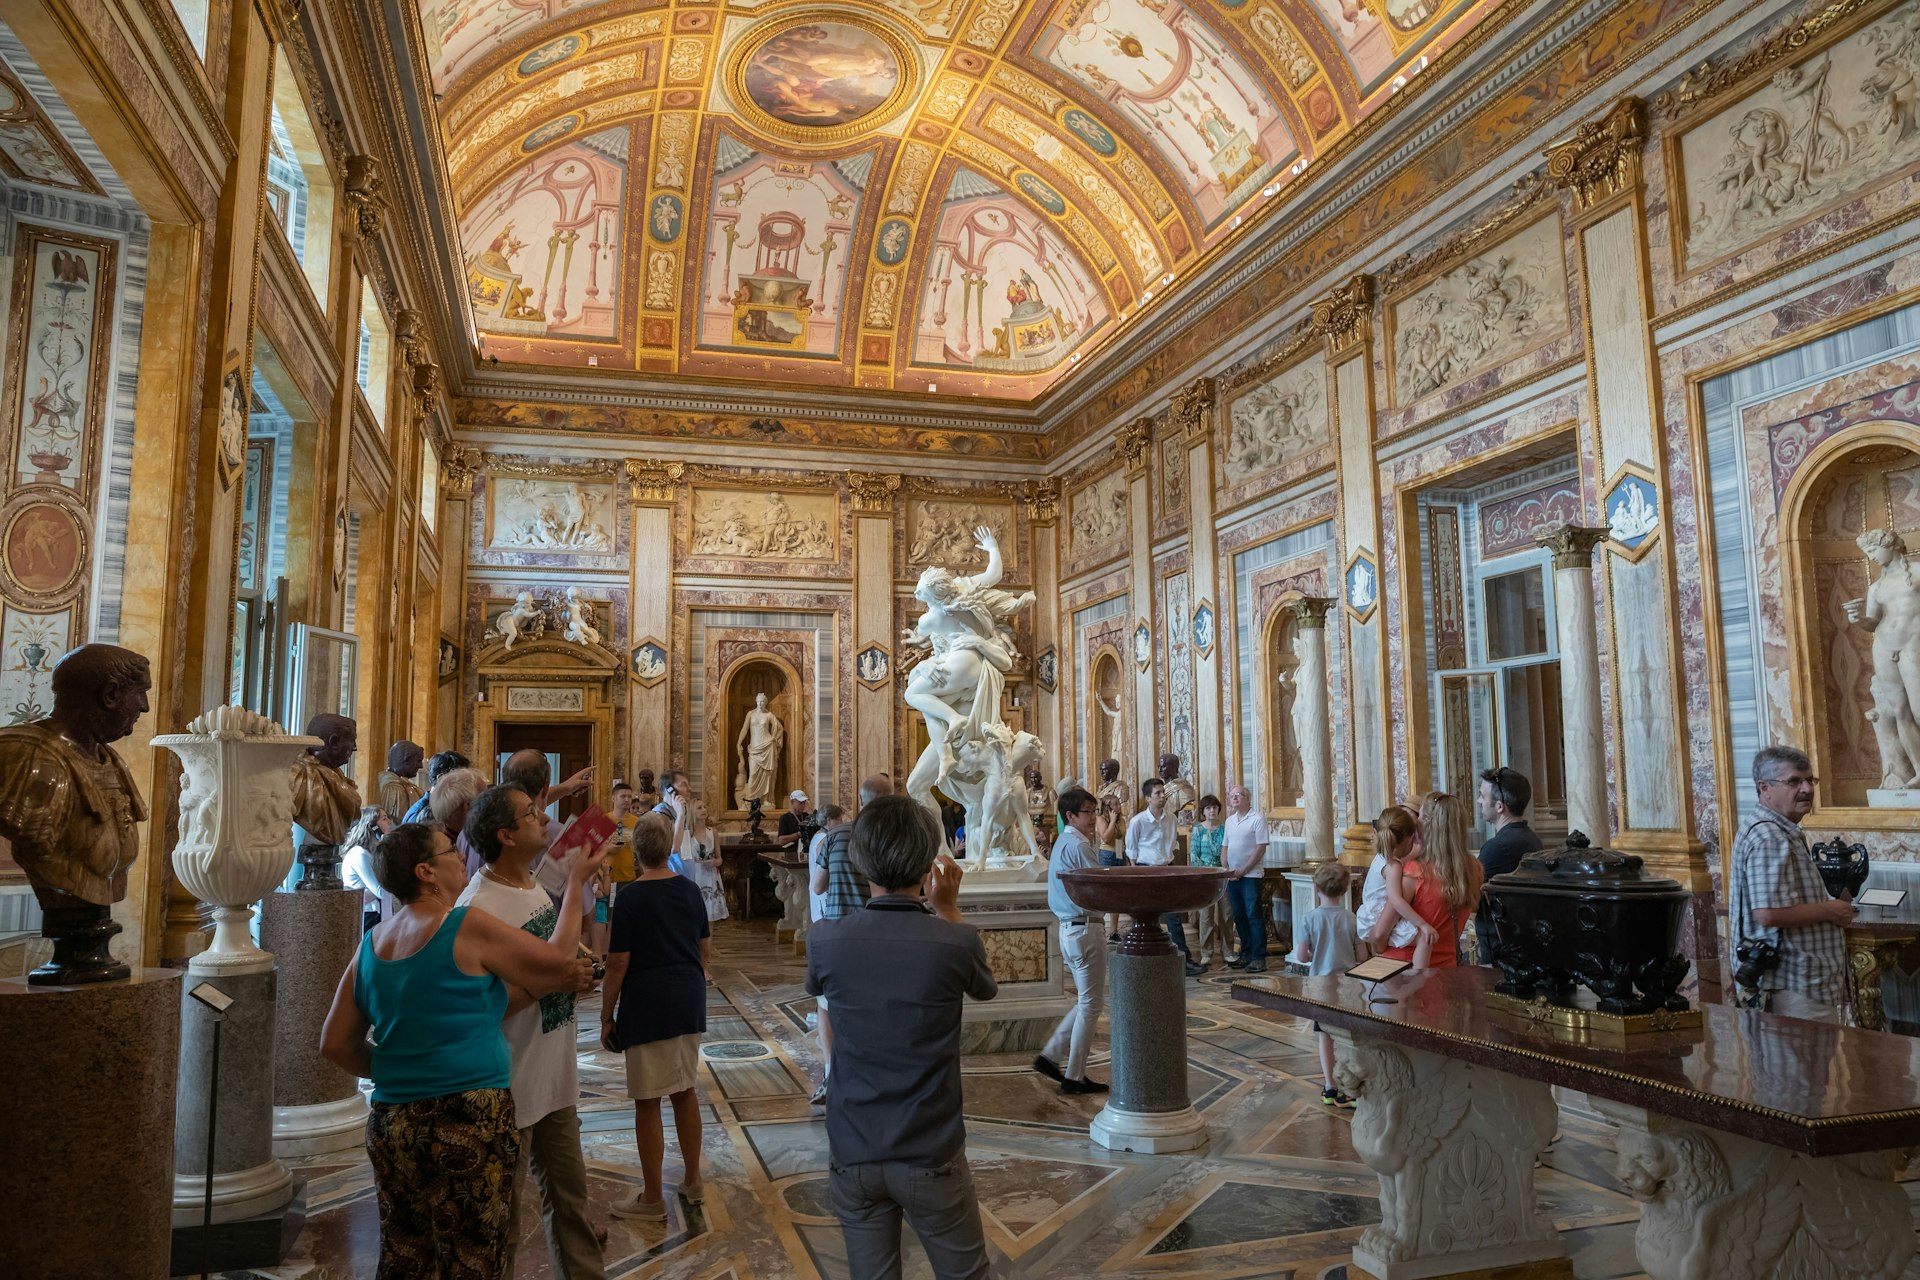 A large room with people admiring art. There's a huge marble sculpture in the center of the room